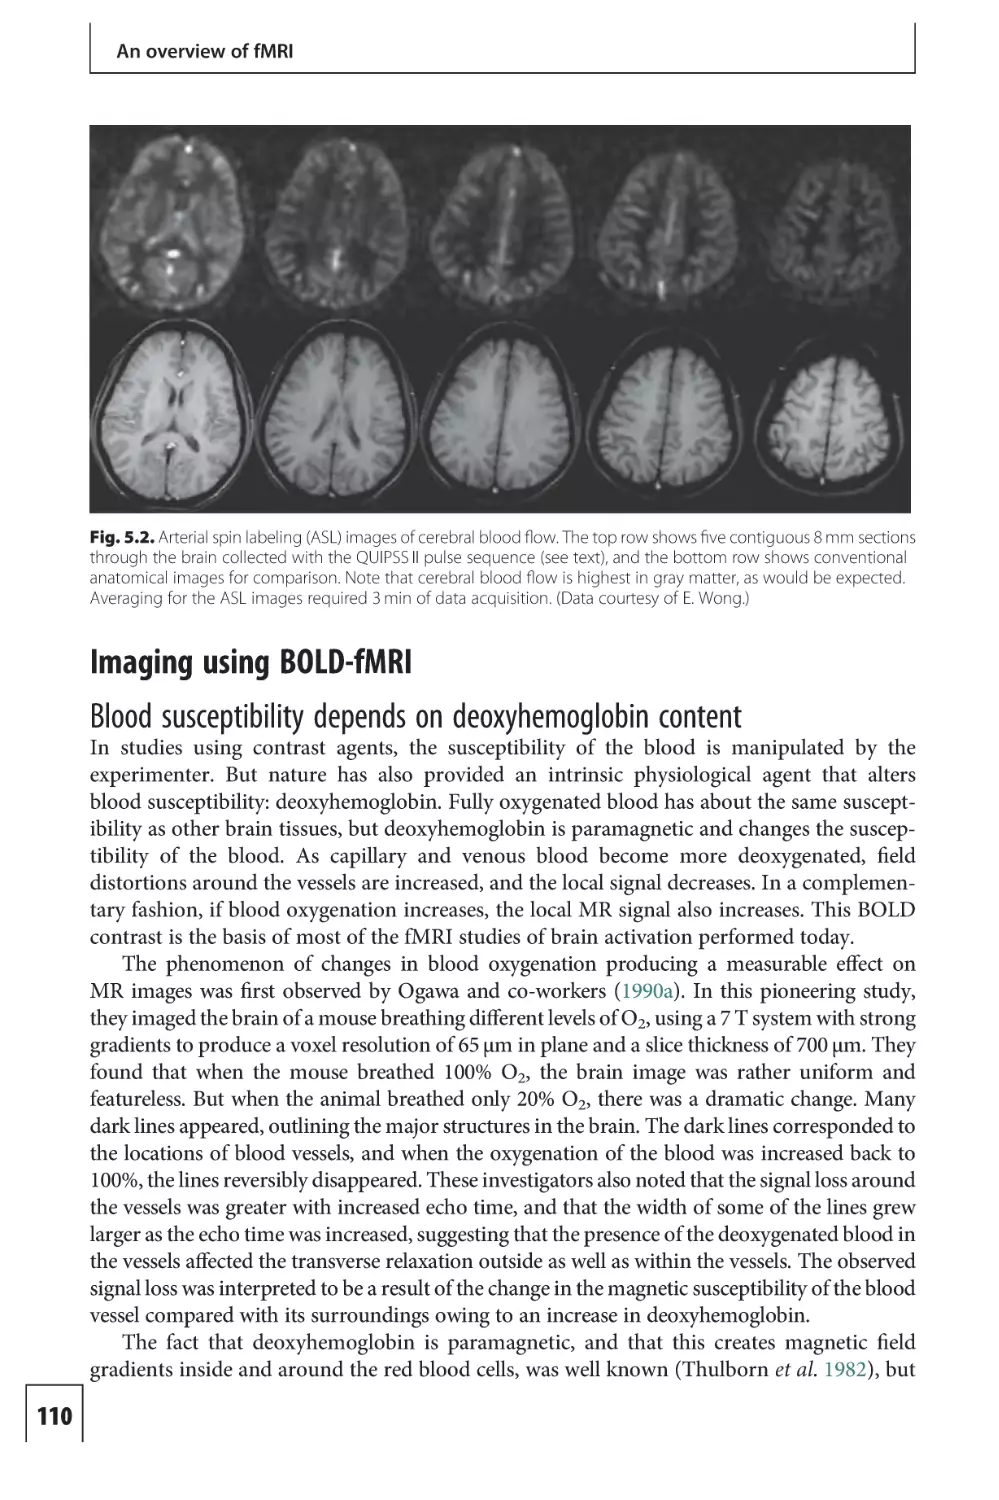 Imaging using BOLD-fMRI
Blood susceptibility depends on deoxyhemoglobin content